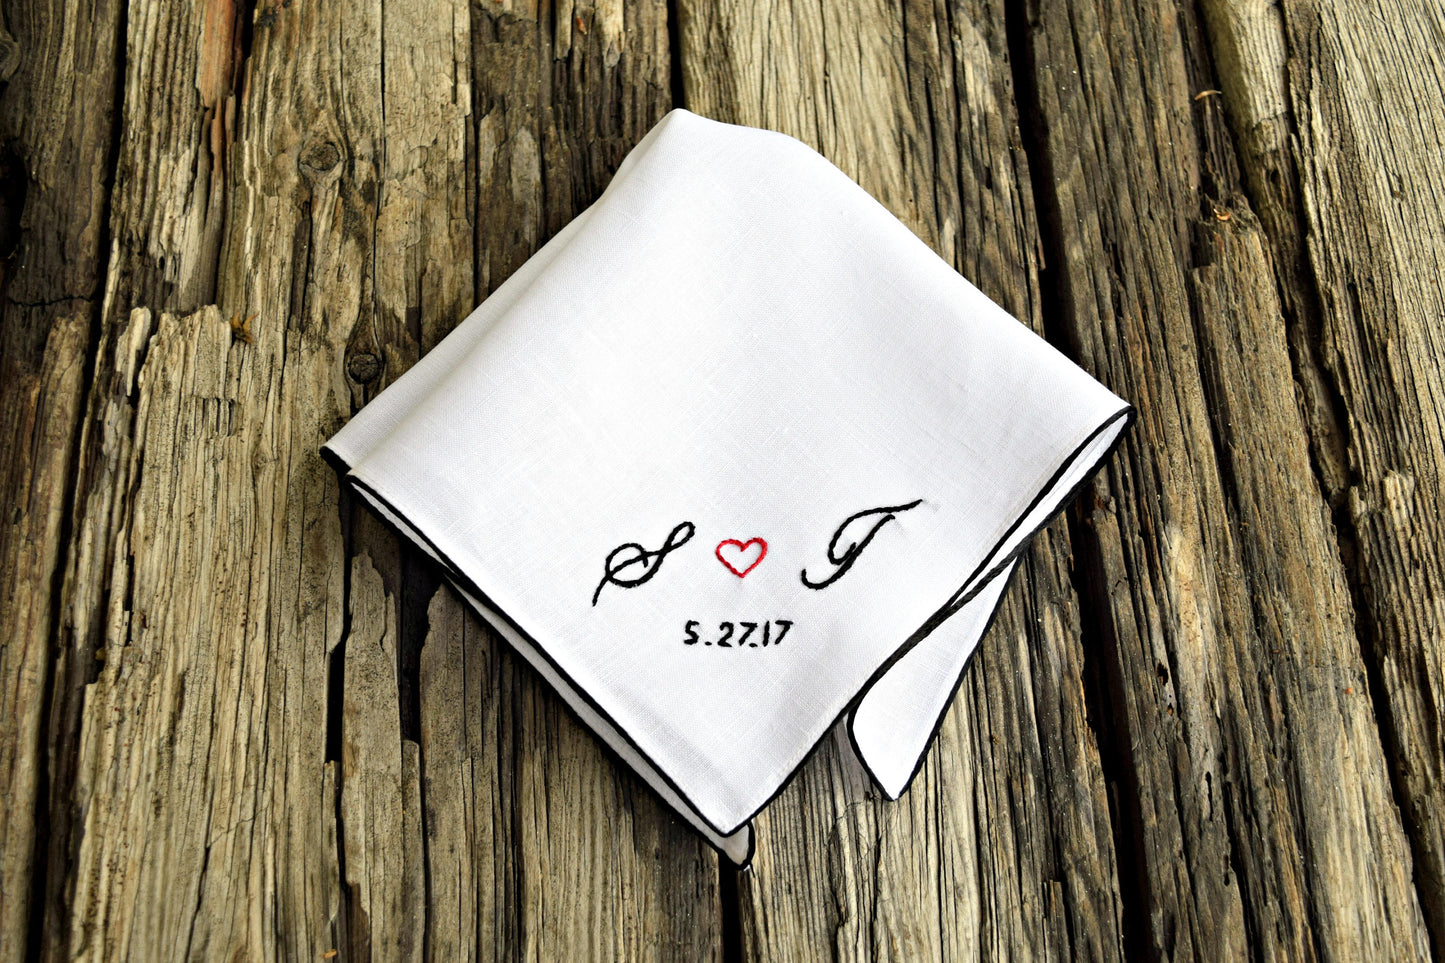 White linen hankie with black satin border and custom sweetheart monogram in black and red